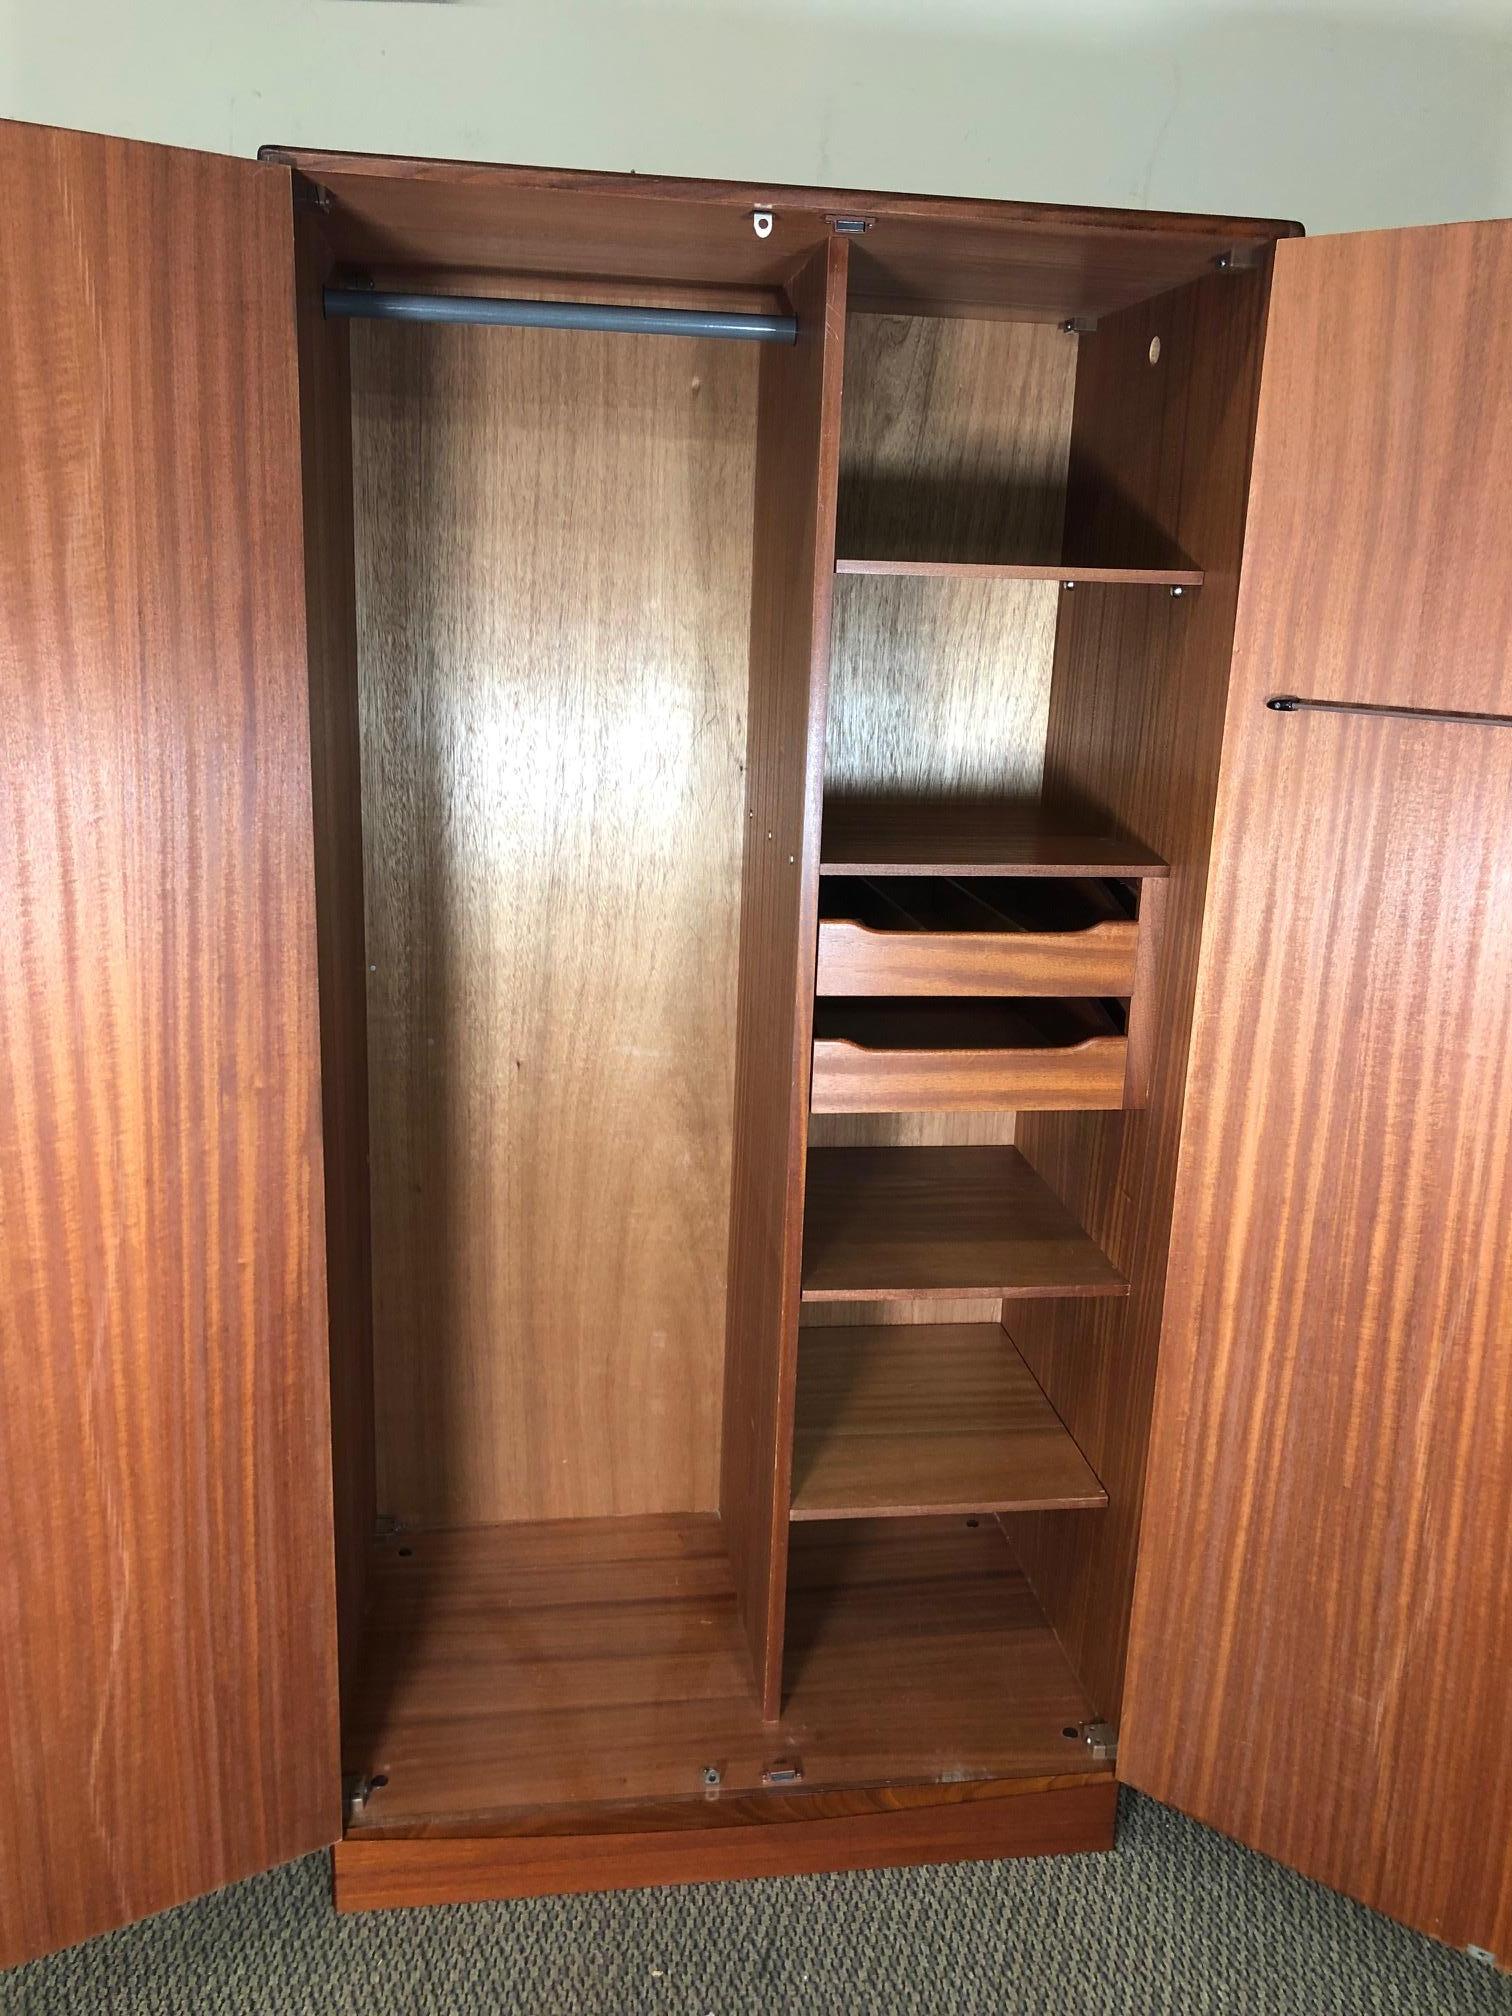 Amazing teak wardrobe by G Plan. Designed in the 1960s by Victor Bramwell Wilkins for G Plan's Fresco Range. Danish modern in style.
Two-door wardrobe with half hanging space on the left side and shelves and drawer space on the right. Top drawer